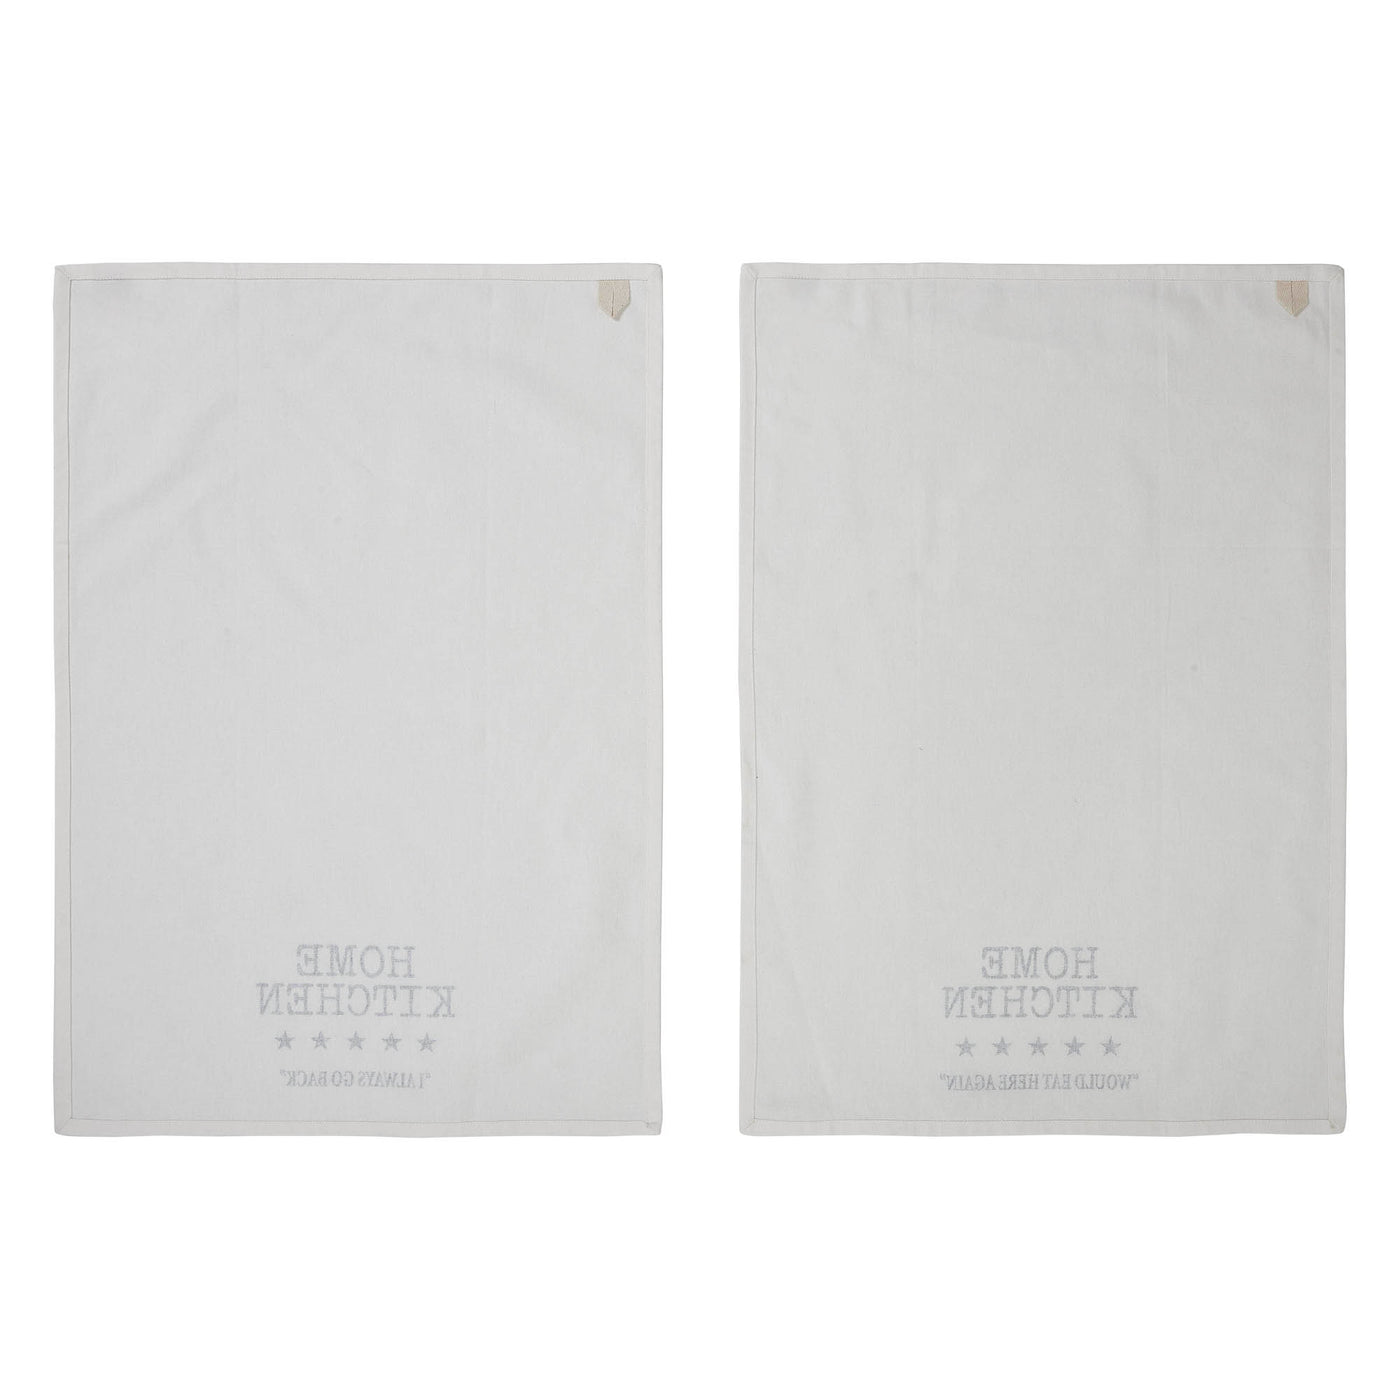 Home Kitchen 5 Star Review Tea Towel Set of 2